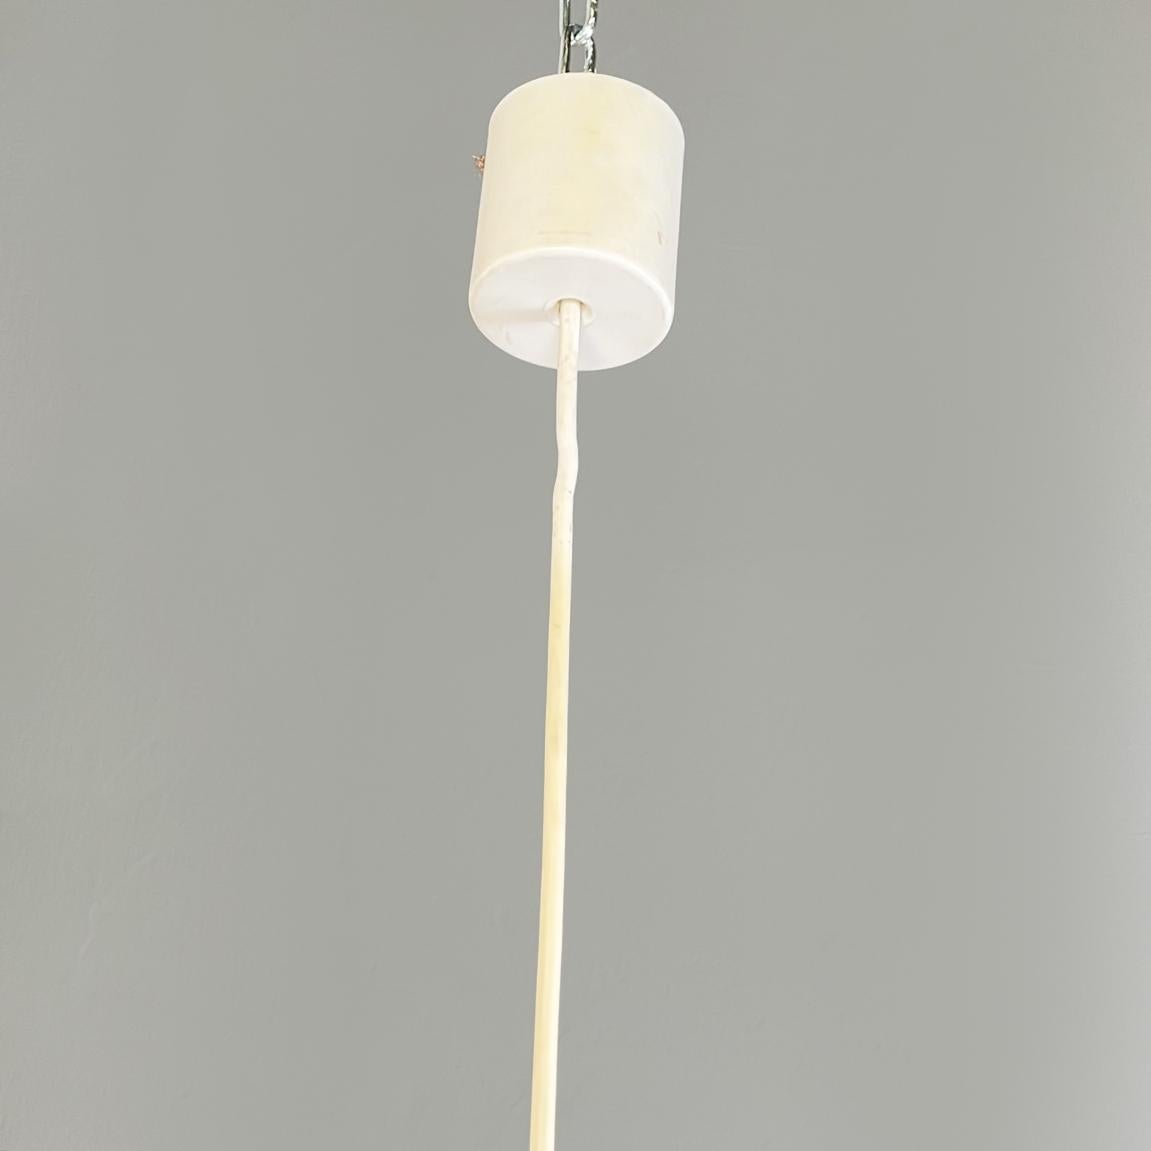 Italian Mid-Century Modern Chandelier in Cocoon and White Metal, 1960s For Sale 6